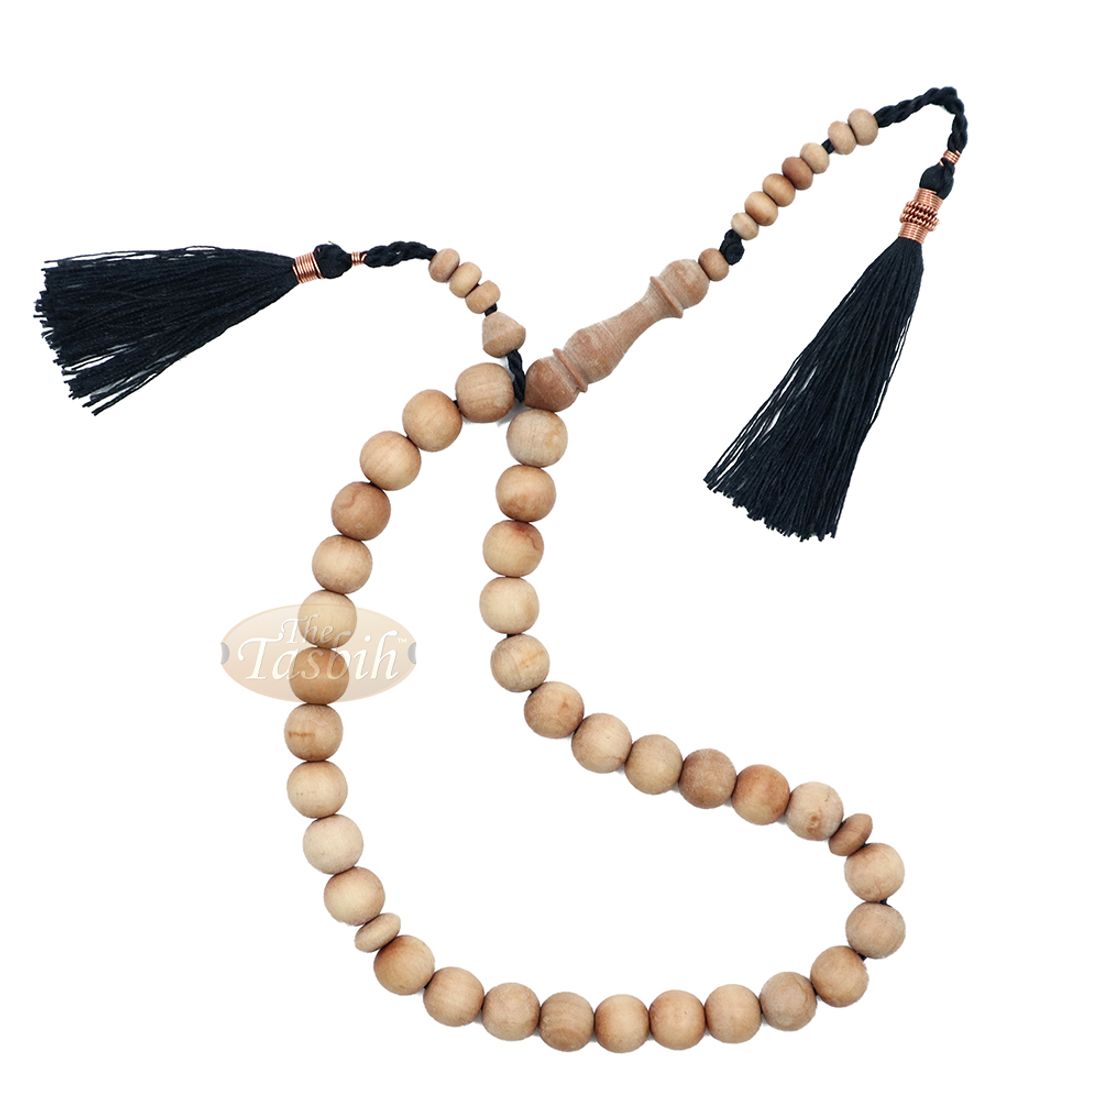 Sandalwood Prayer Beads 10mm Rosary 33-Bead with Black Copper-decorated Tassels